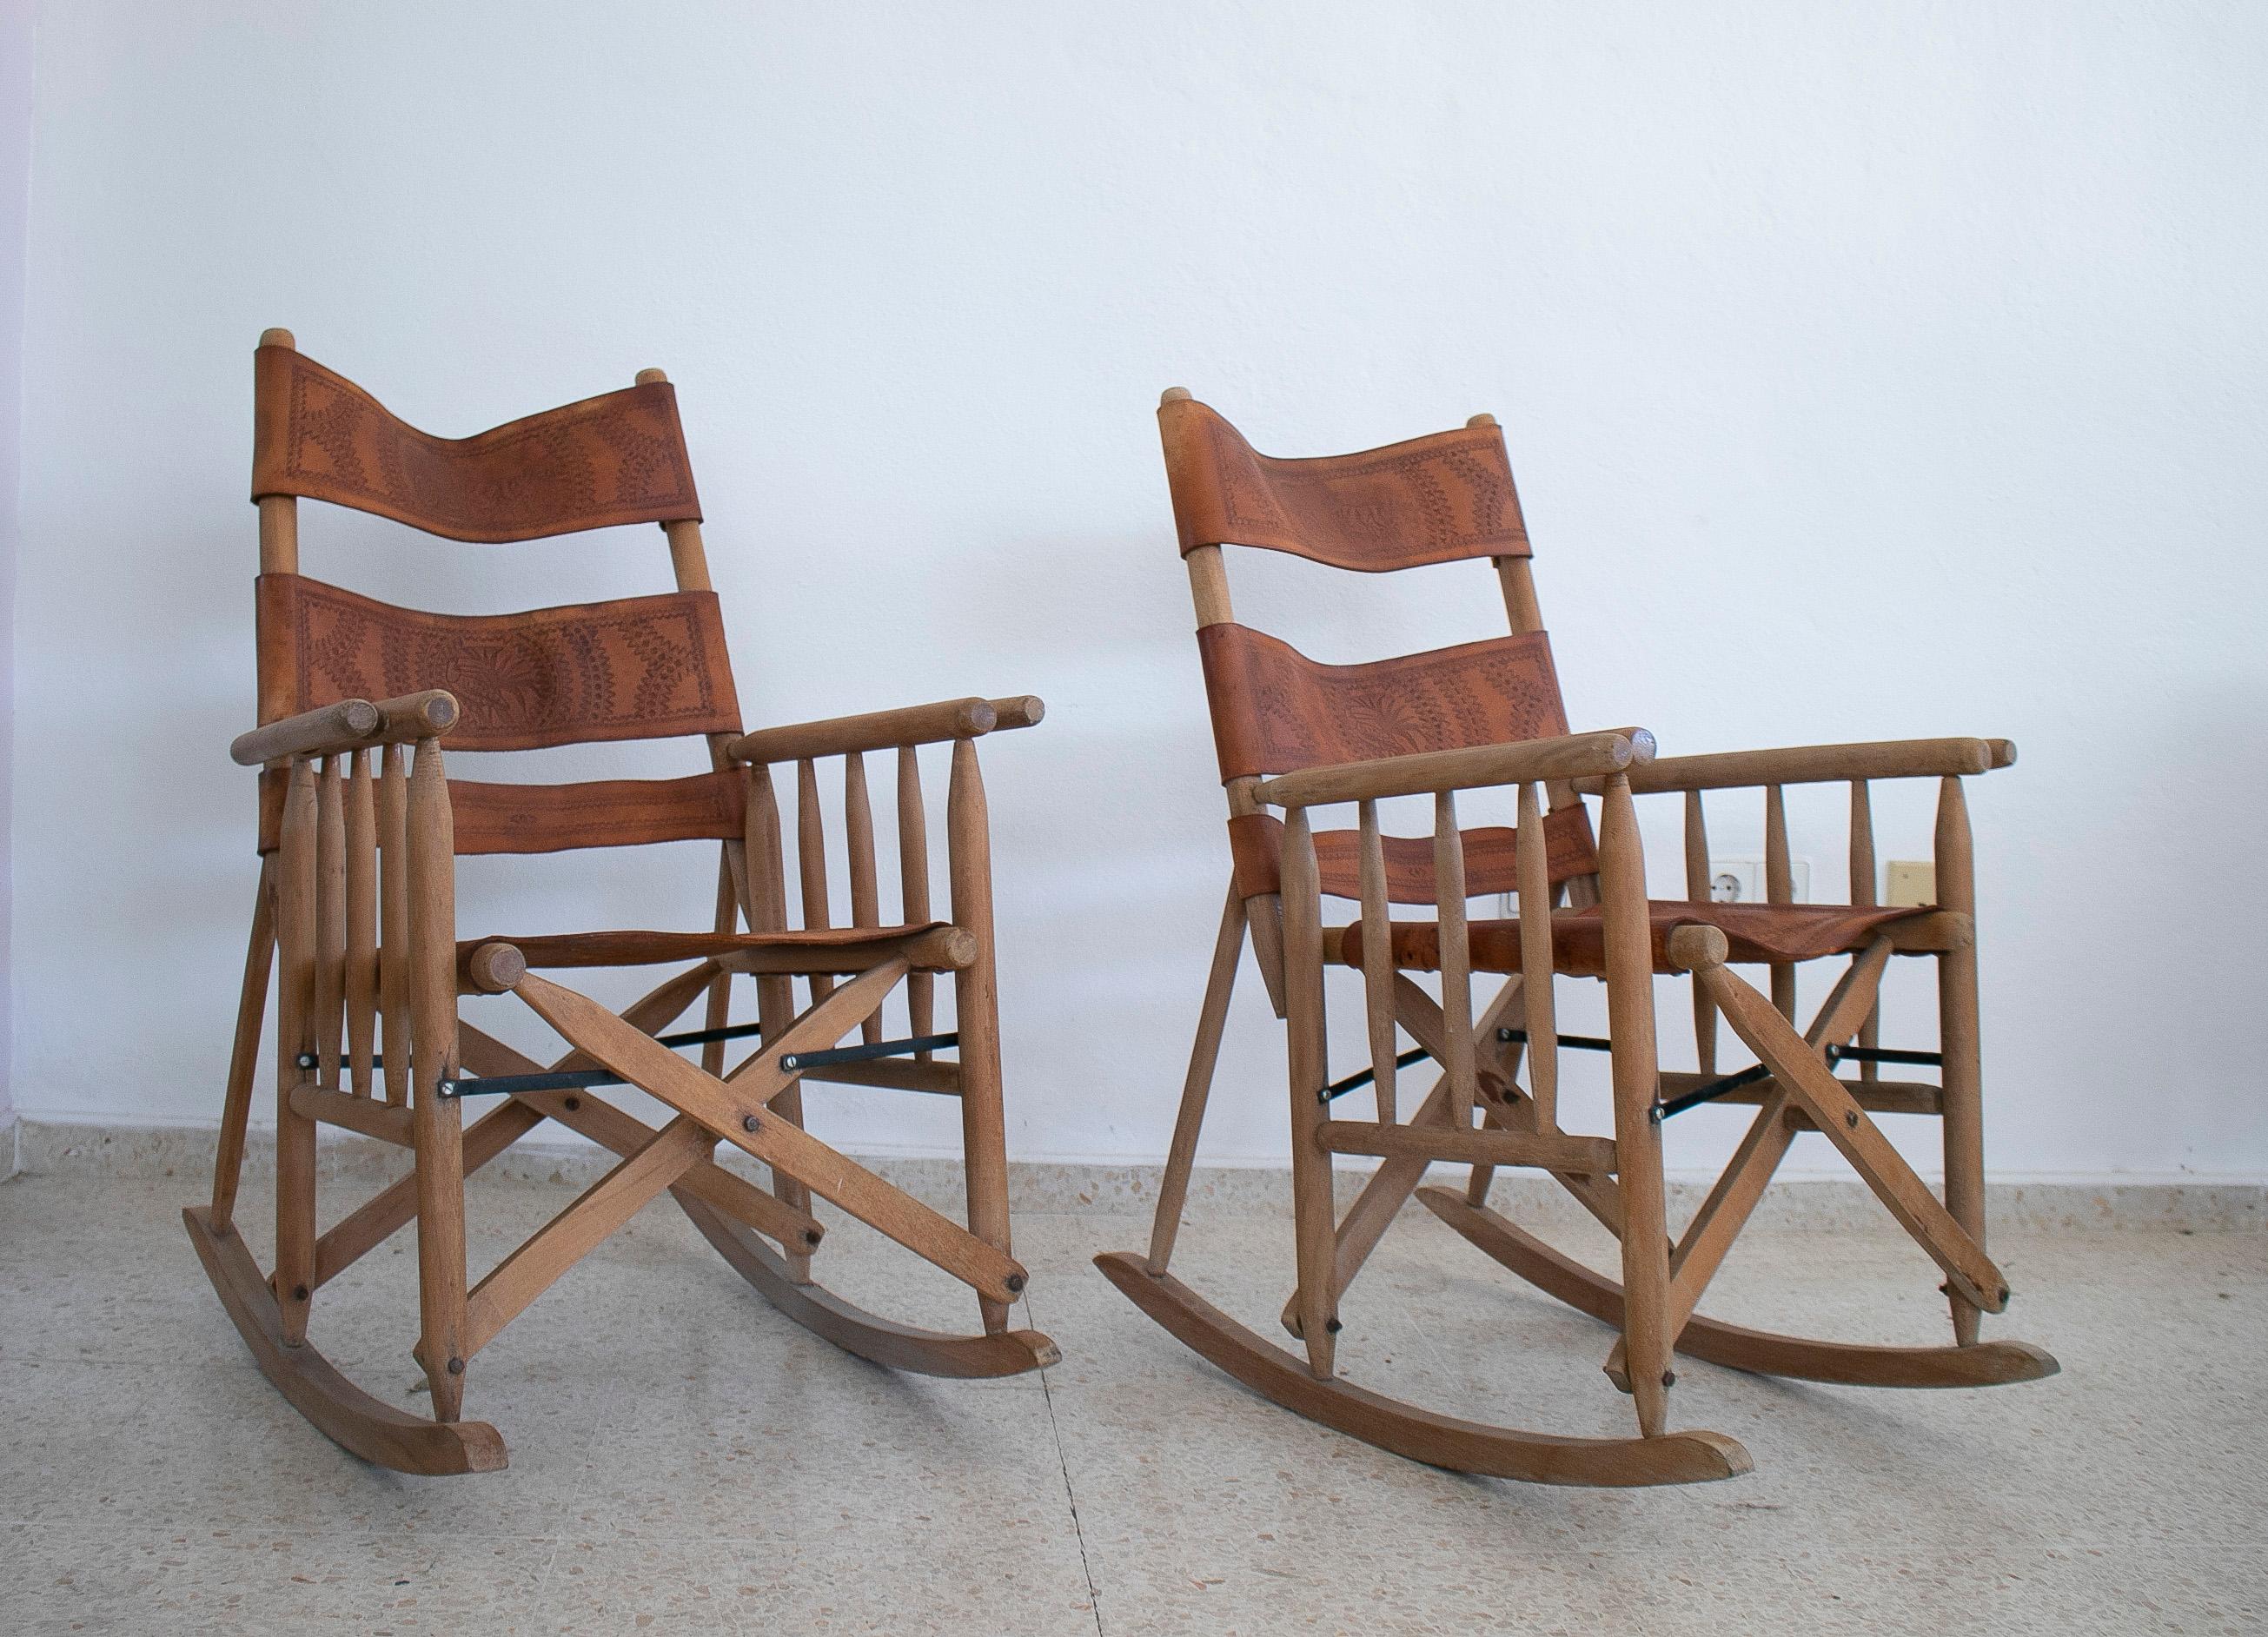 Pair of vintage 1970s Spanish leather wooden rocking chairs.